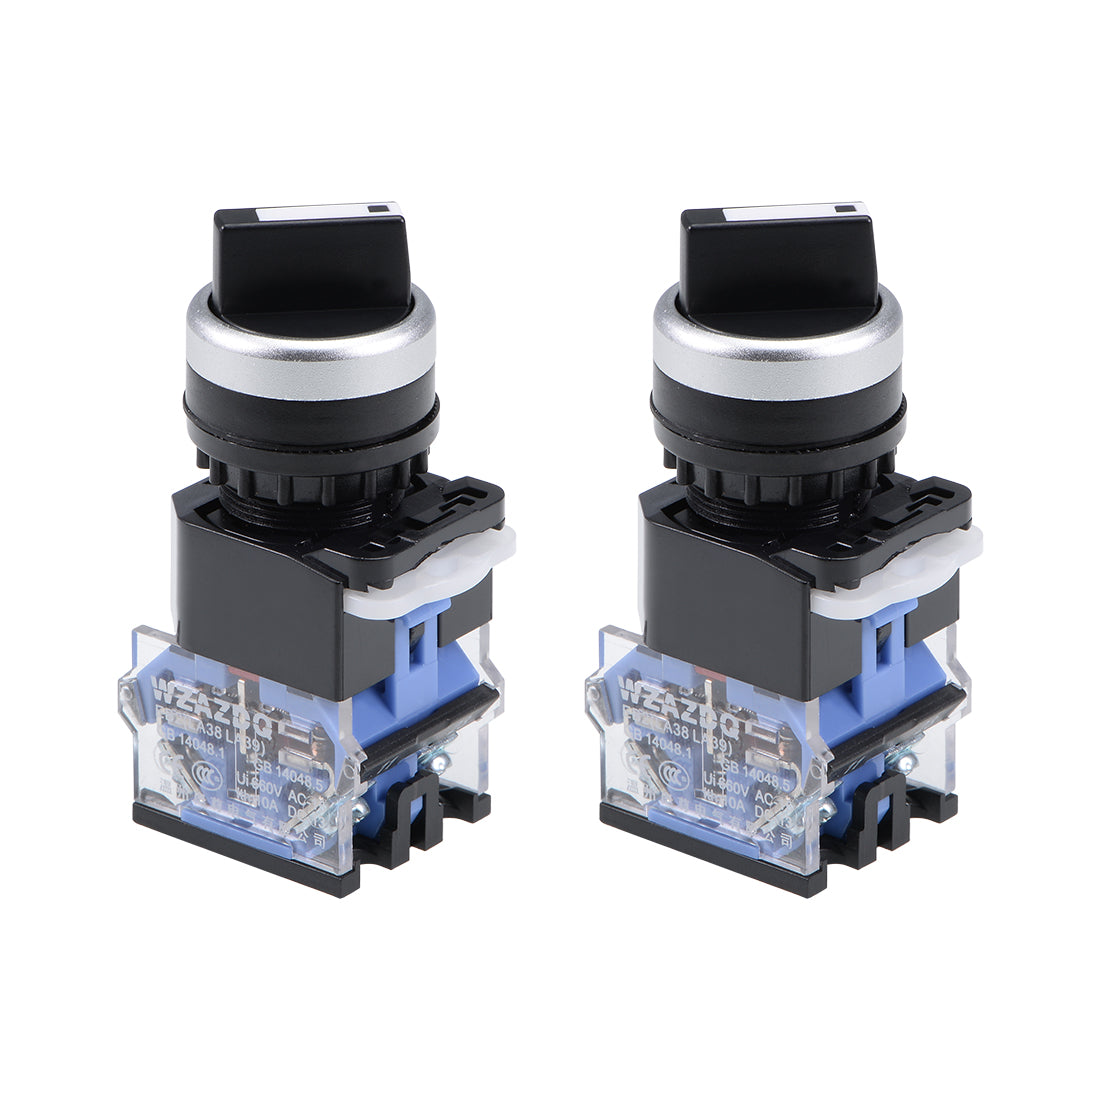 uxcell Uxcell Rotary Selector Switch 2 Positions 2NC Self-Lock Latching AC 660V 10A 22mm Panel Mount 2pcs